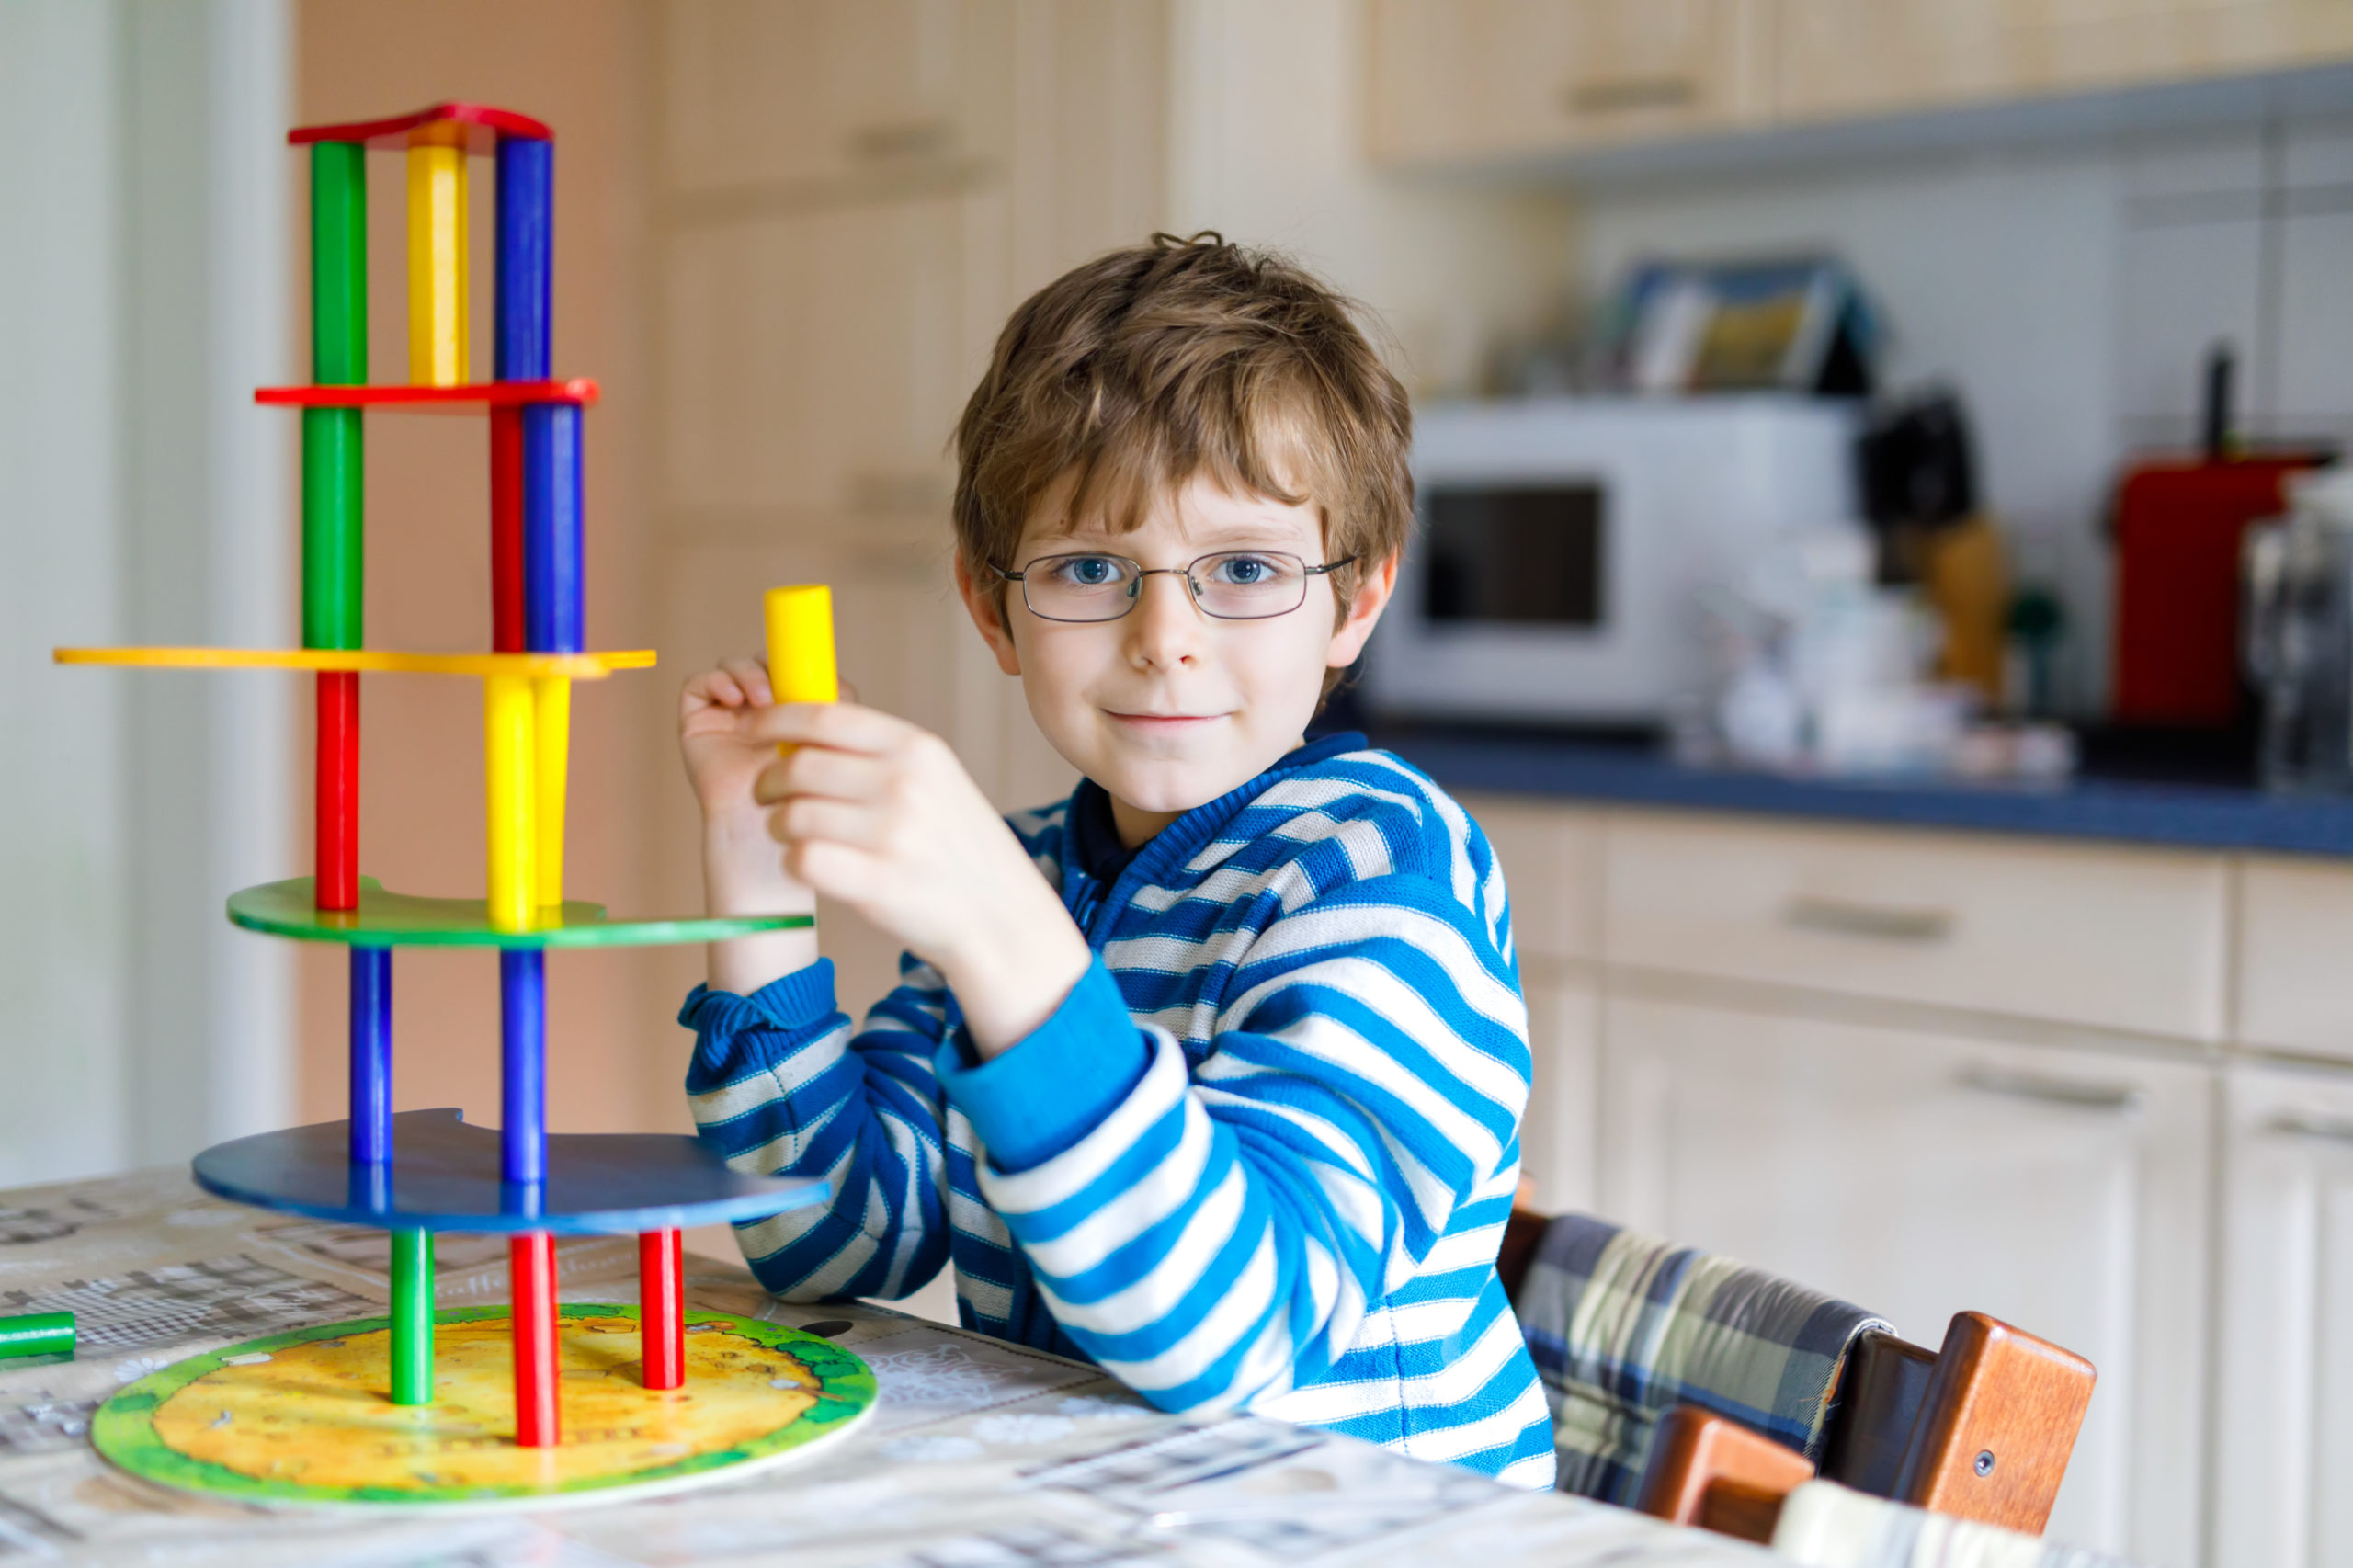 Blond child with glasses playing with lots of colorful wooden blocks game indoor. Active funny kid boy having fun with building and creating, balance toy. Kindergarten. Home, kidsroom. Cognitive development